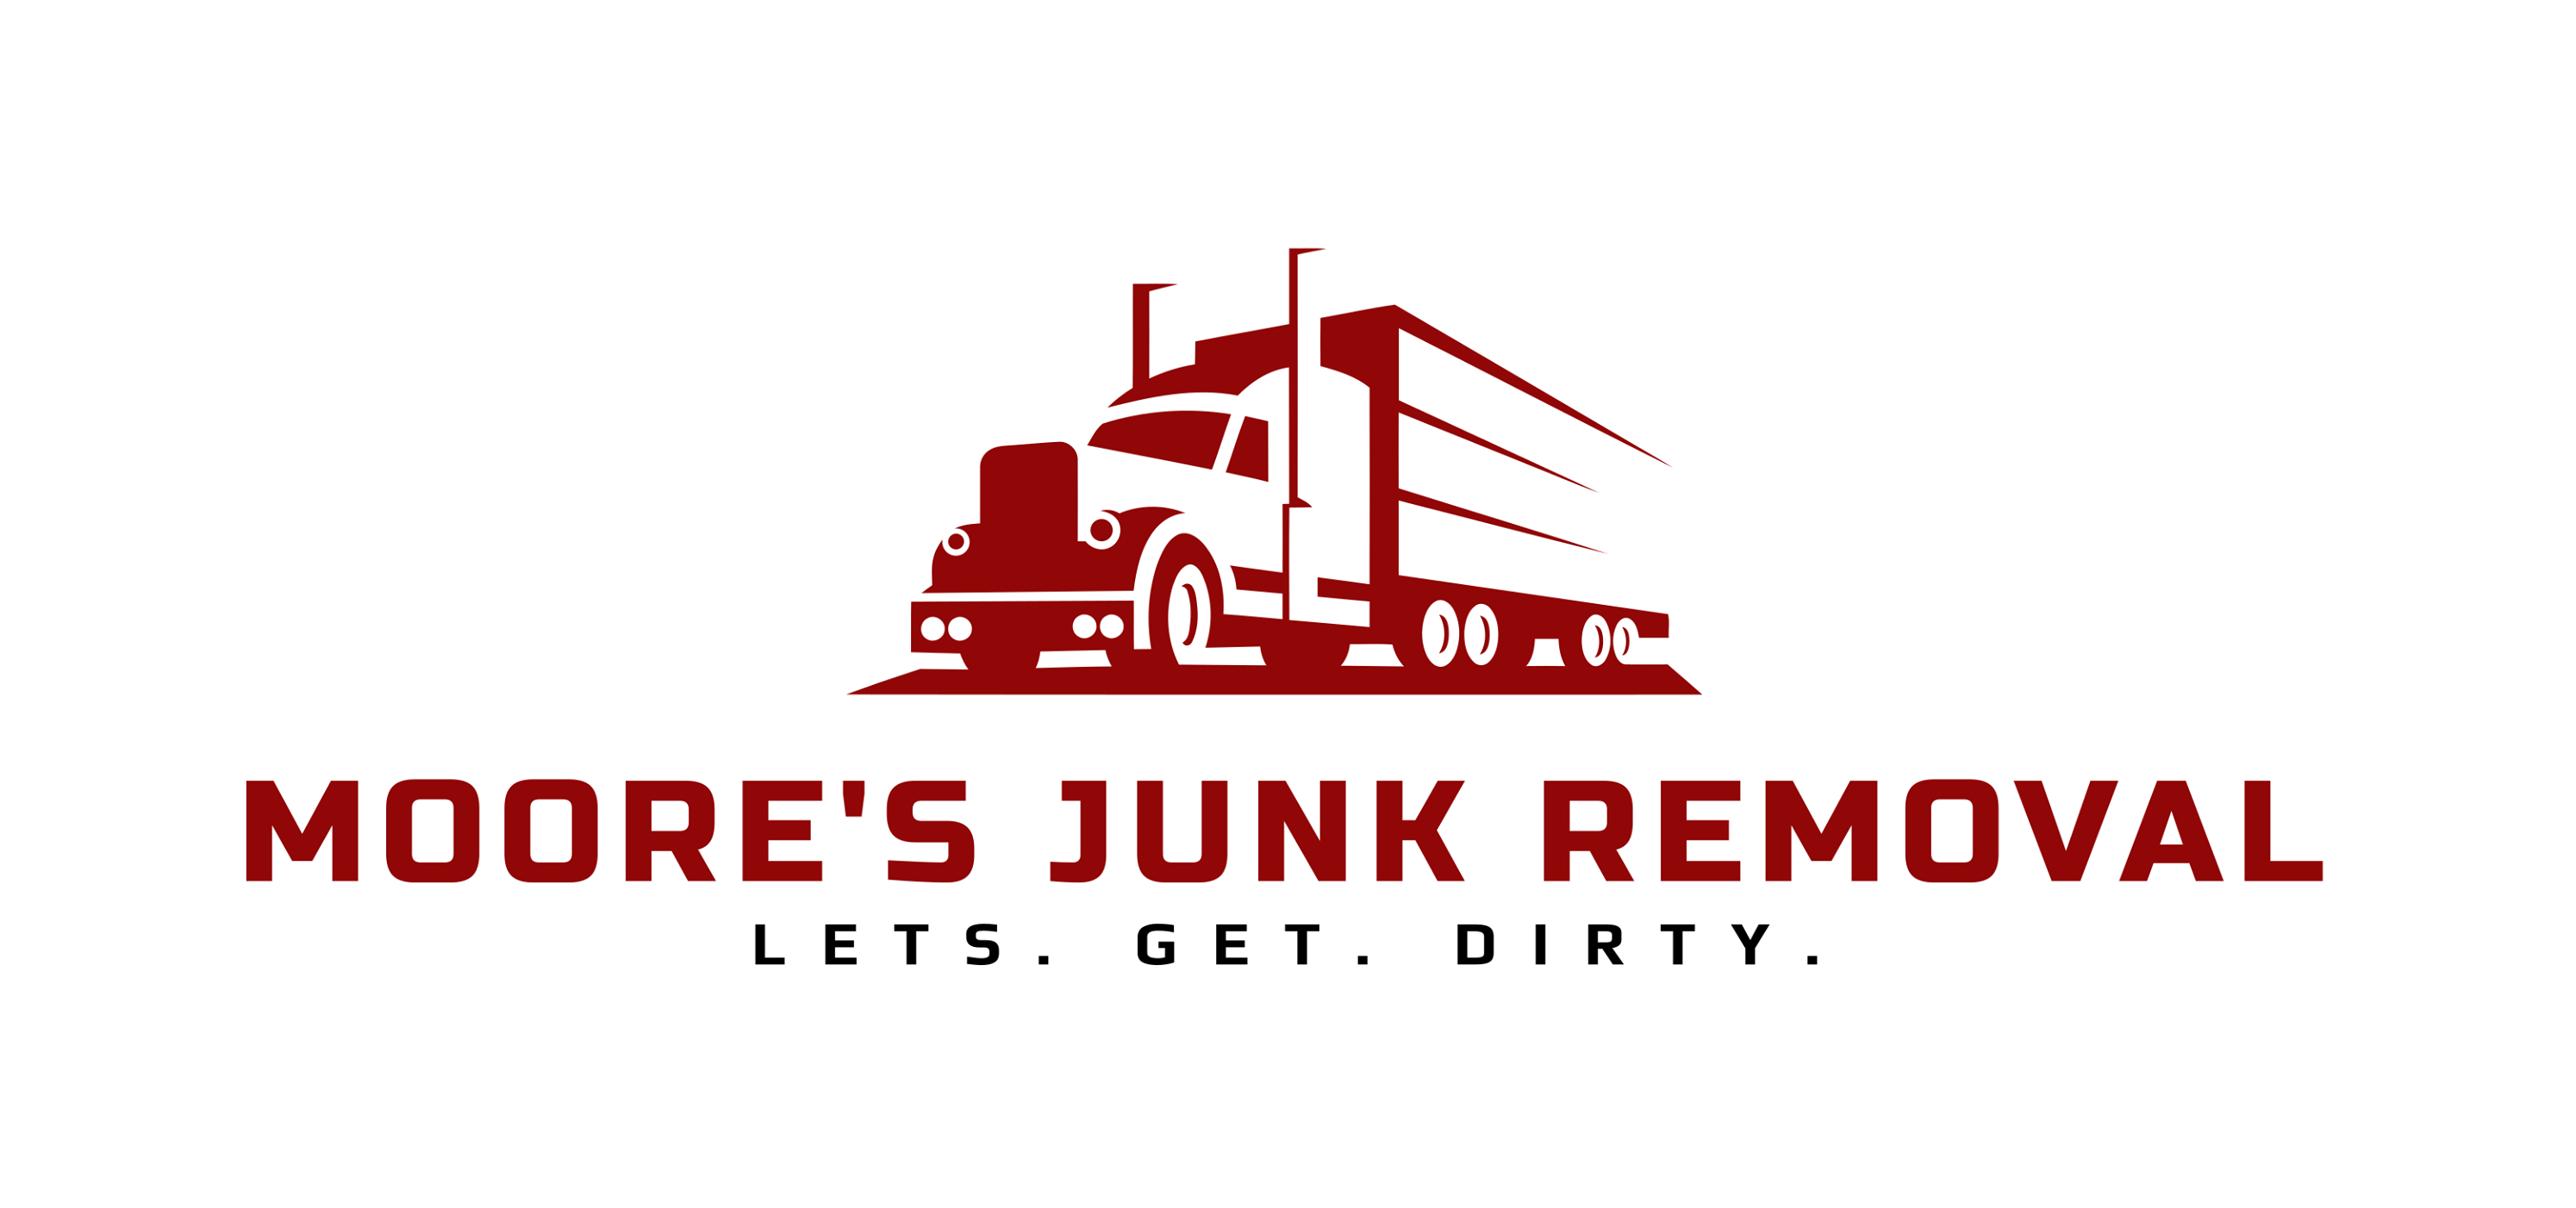 Moore's Junk Removal logo